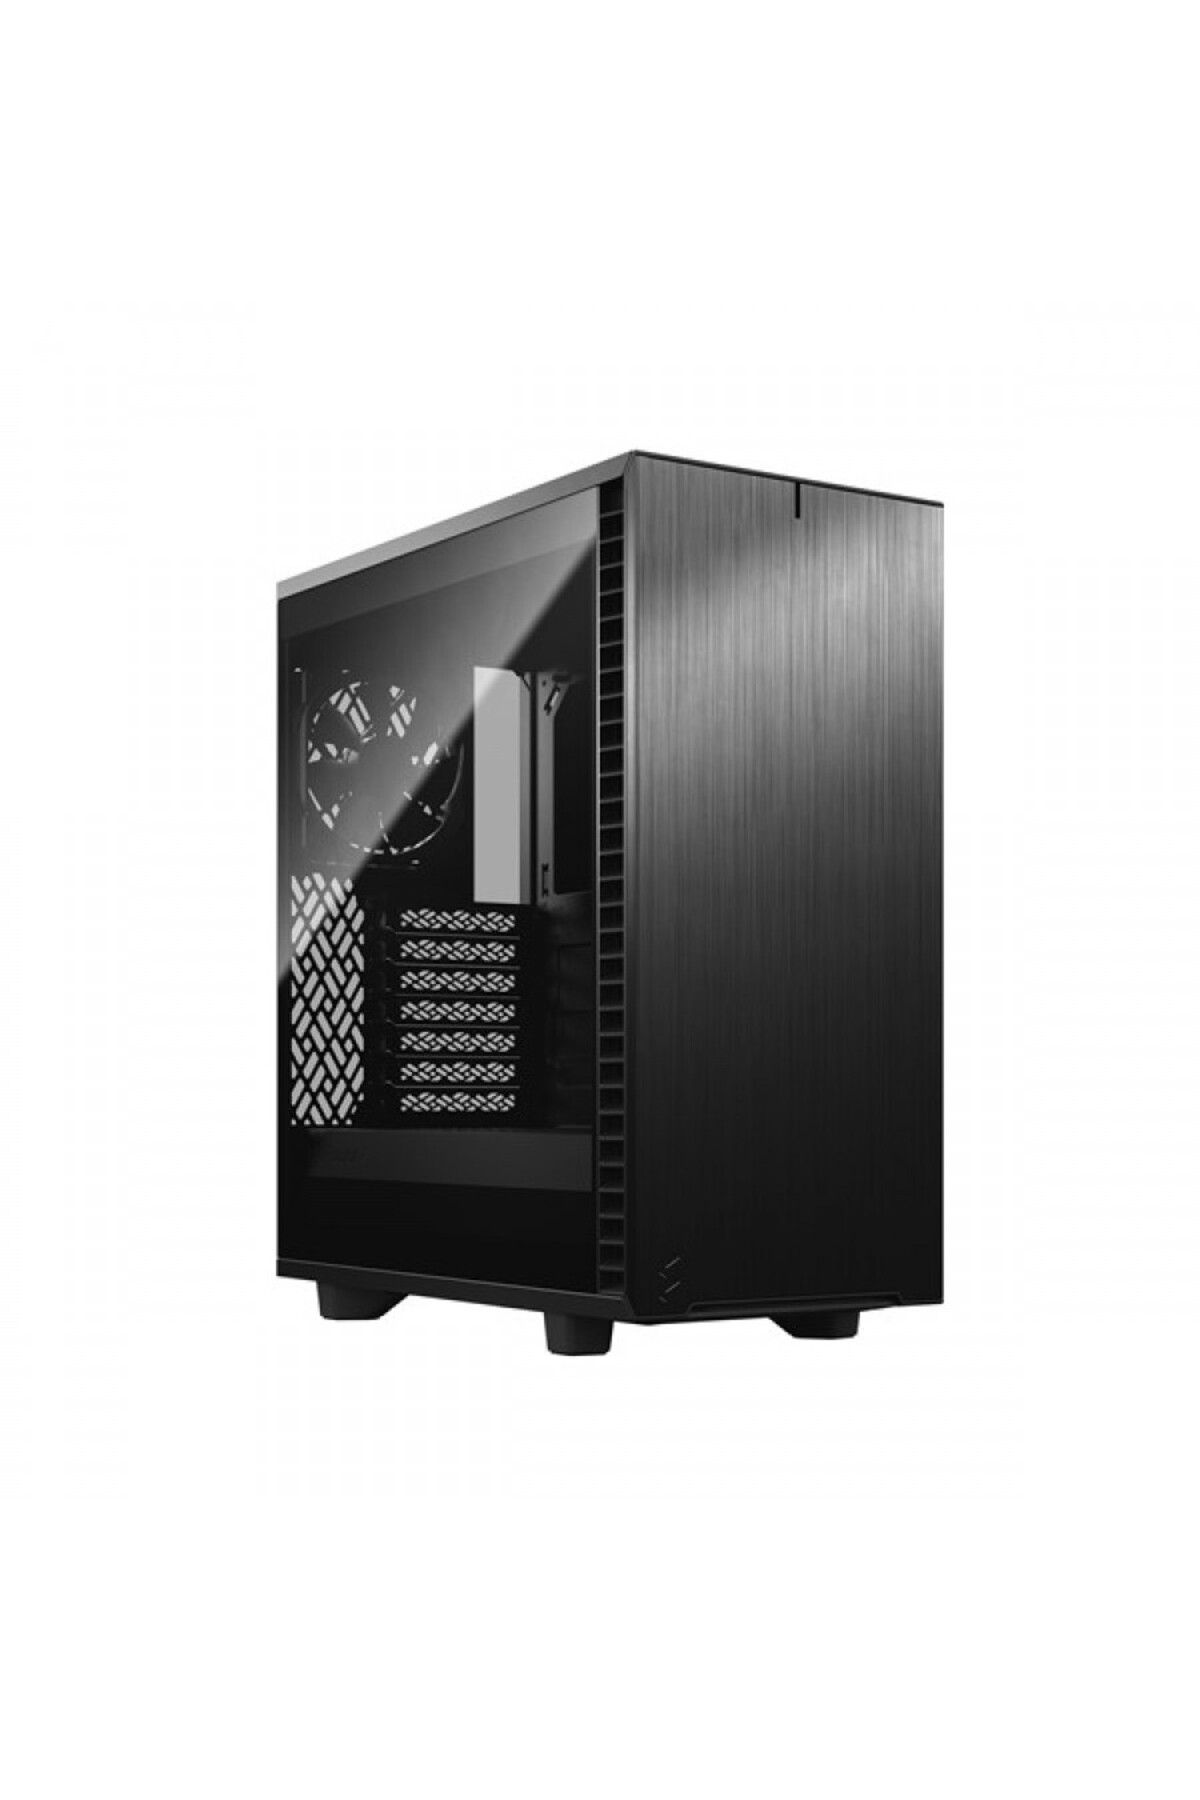 Fractal Design DEFINE 7 COMPACT FD-C-DEF7C-02 GAMING MID-TOWER PC KASASI